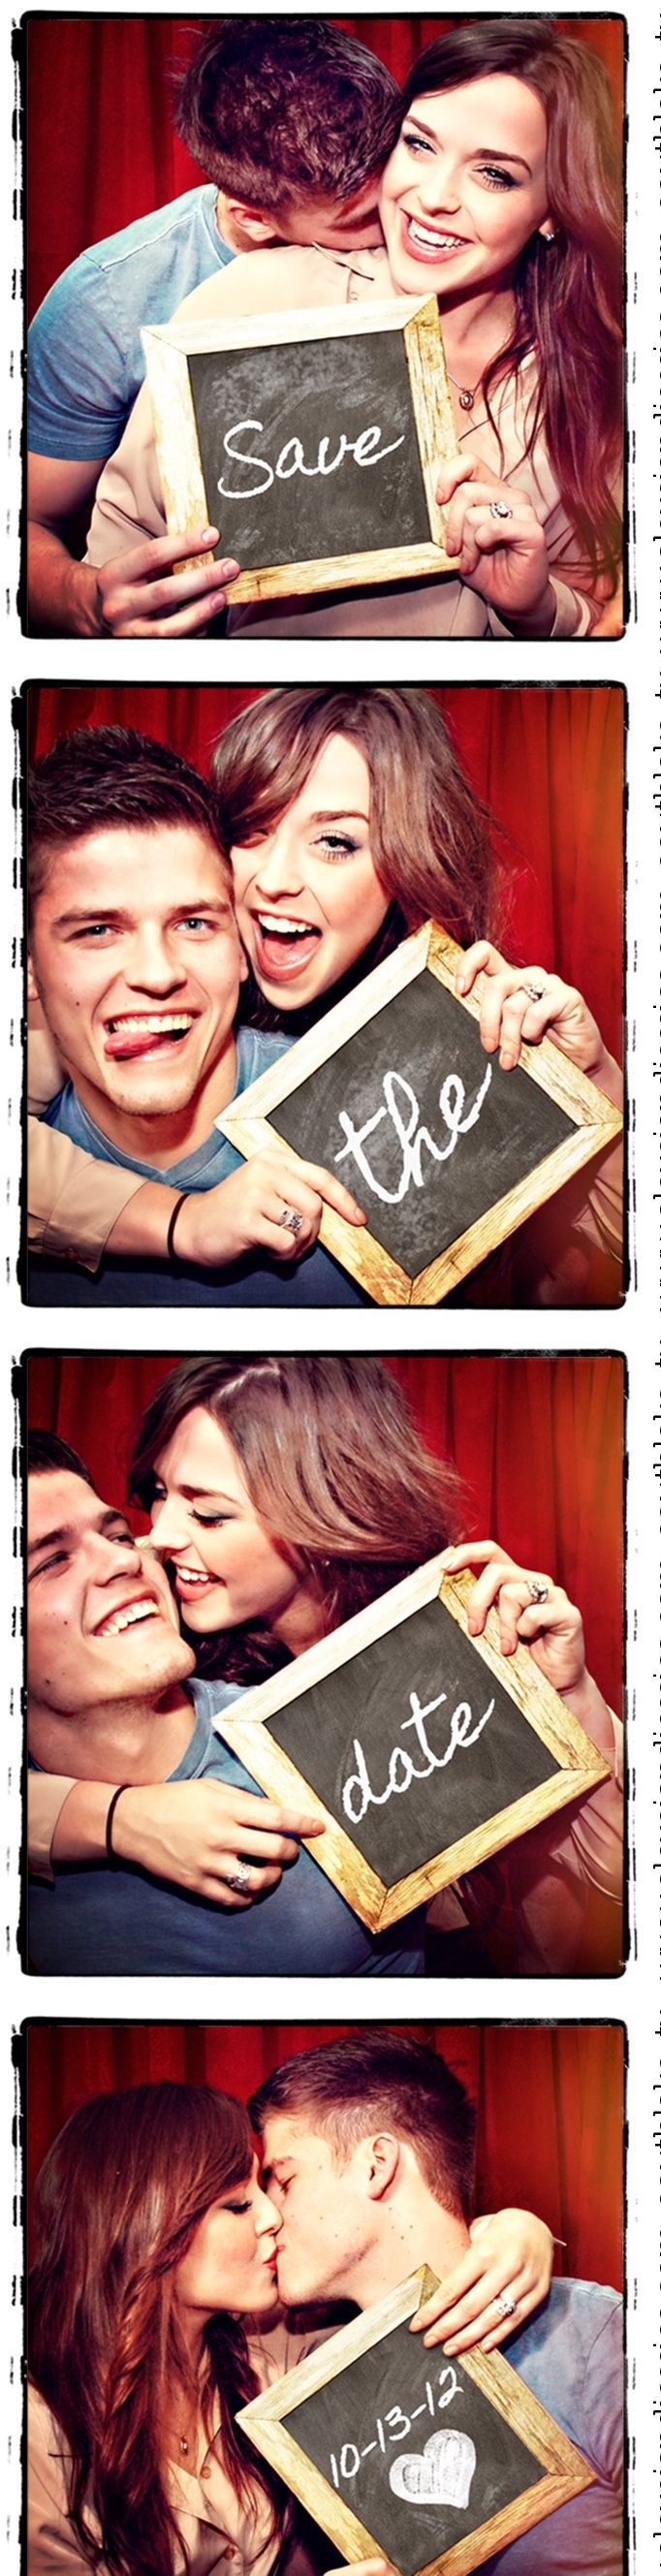 So cute! Especially for those couples who have gotten engaged in a photo booth!